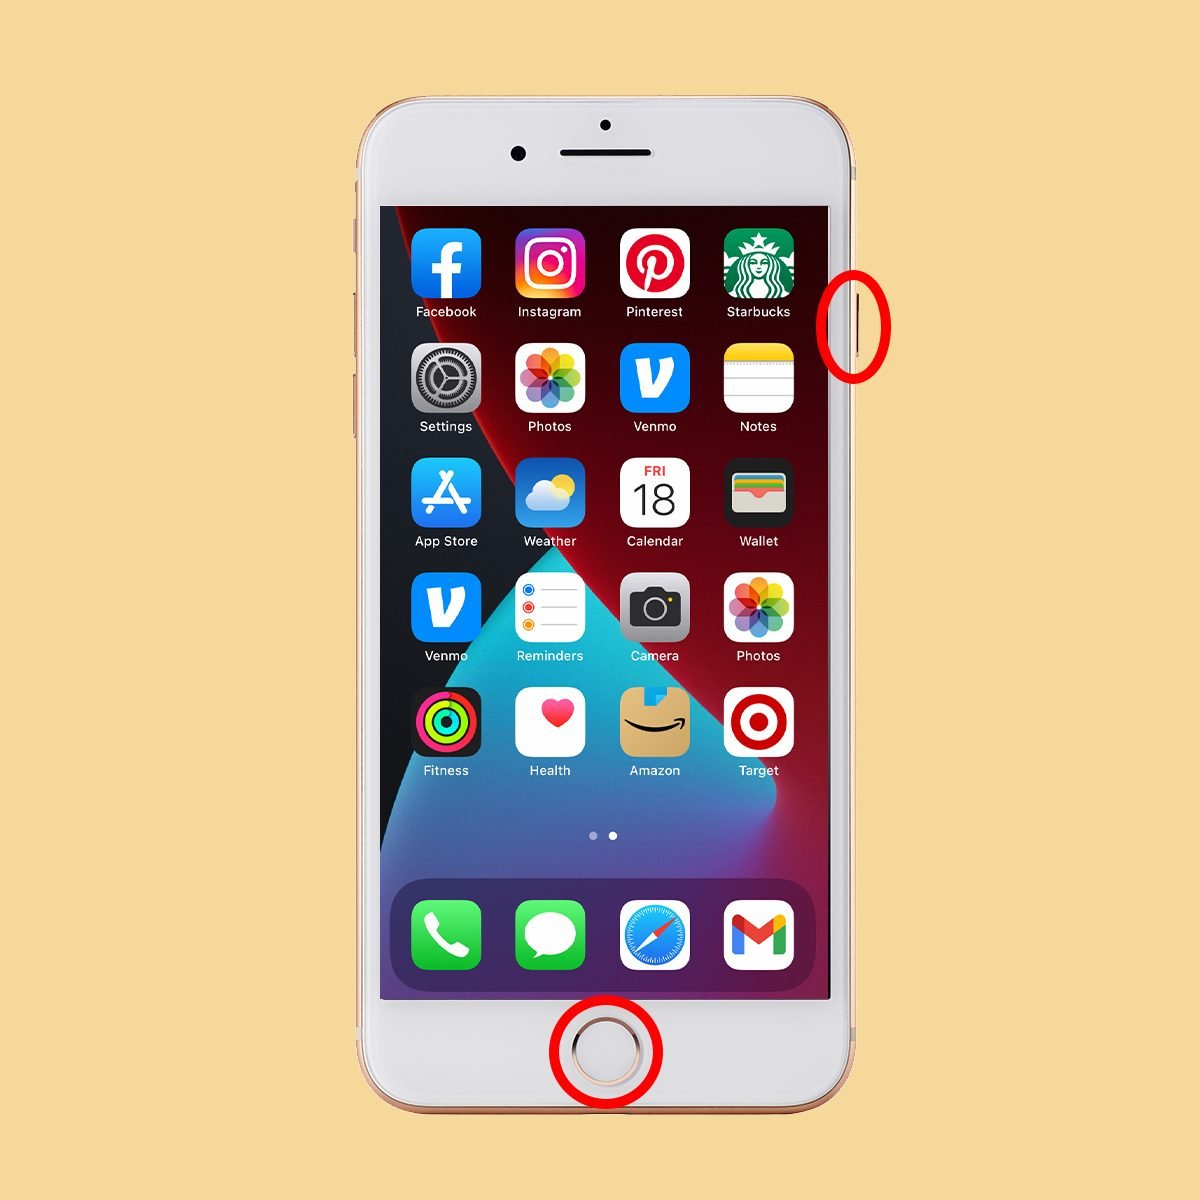 Press the home button and the power button (usually located on the top right of your phone) at the same time.